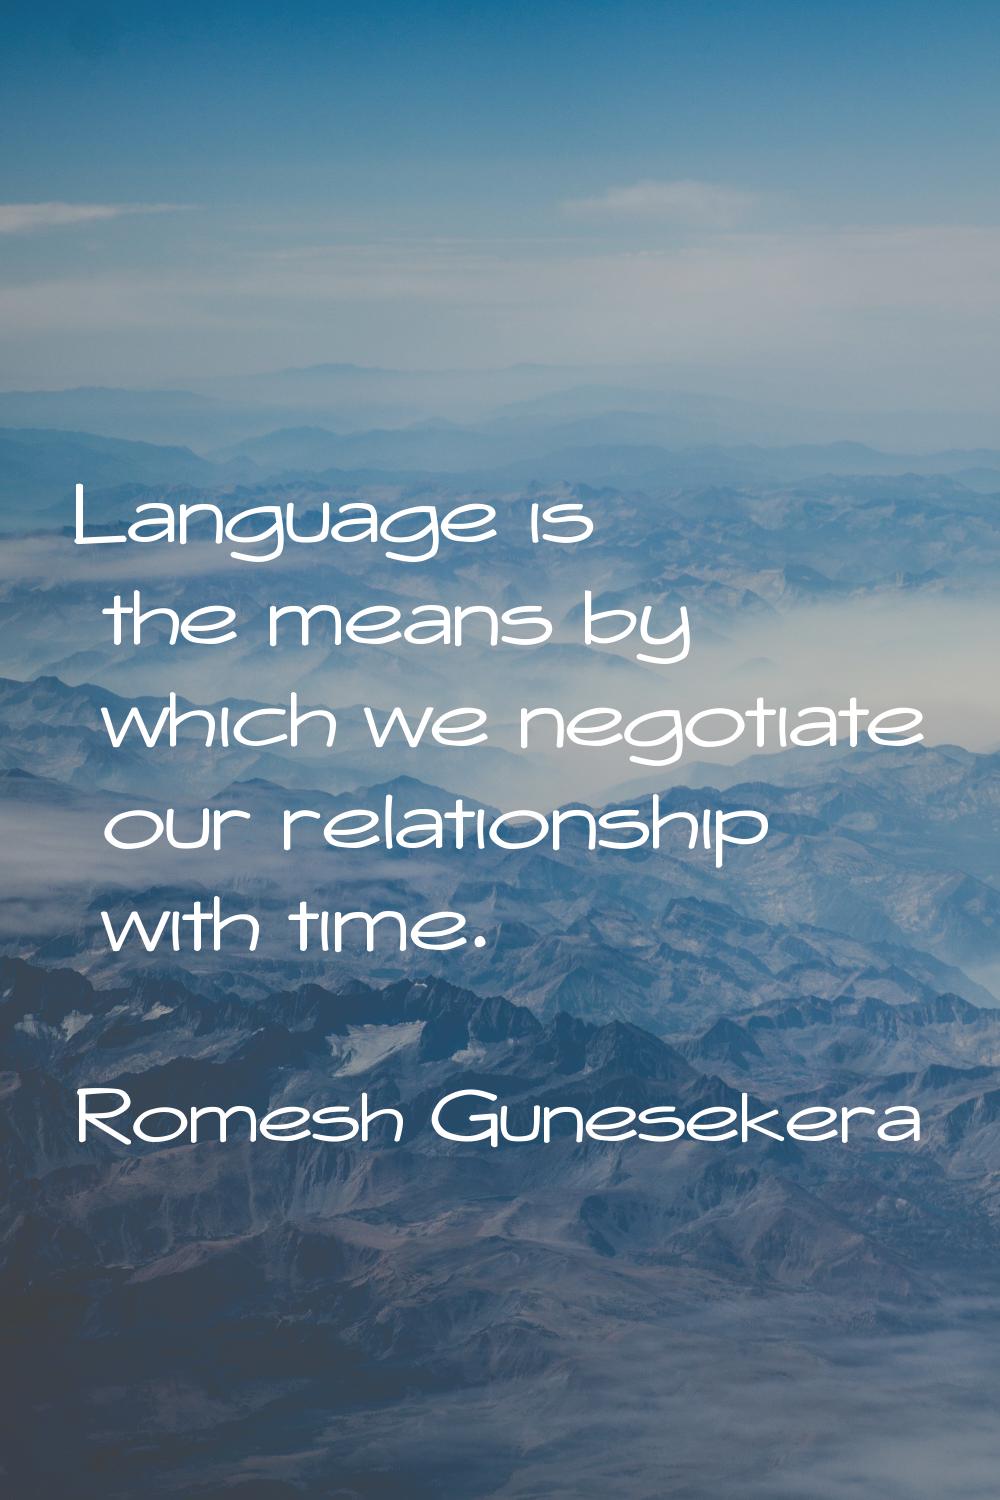 Language is the means by which we negotiate our relationship with time.